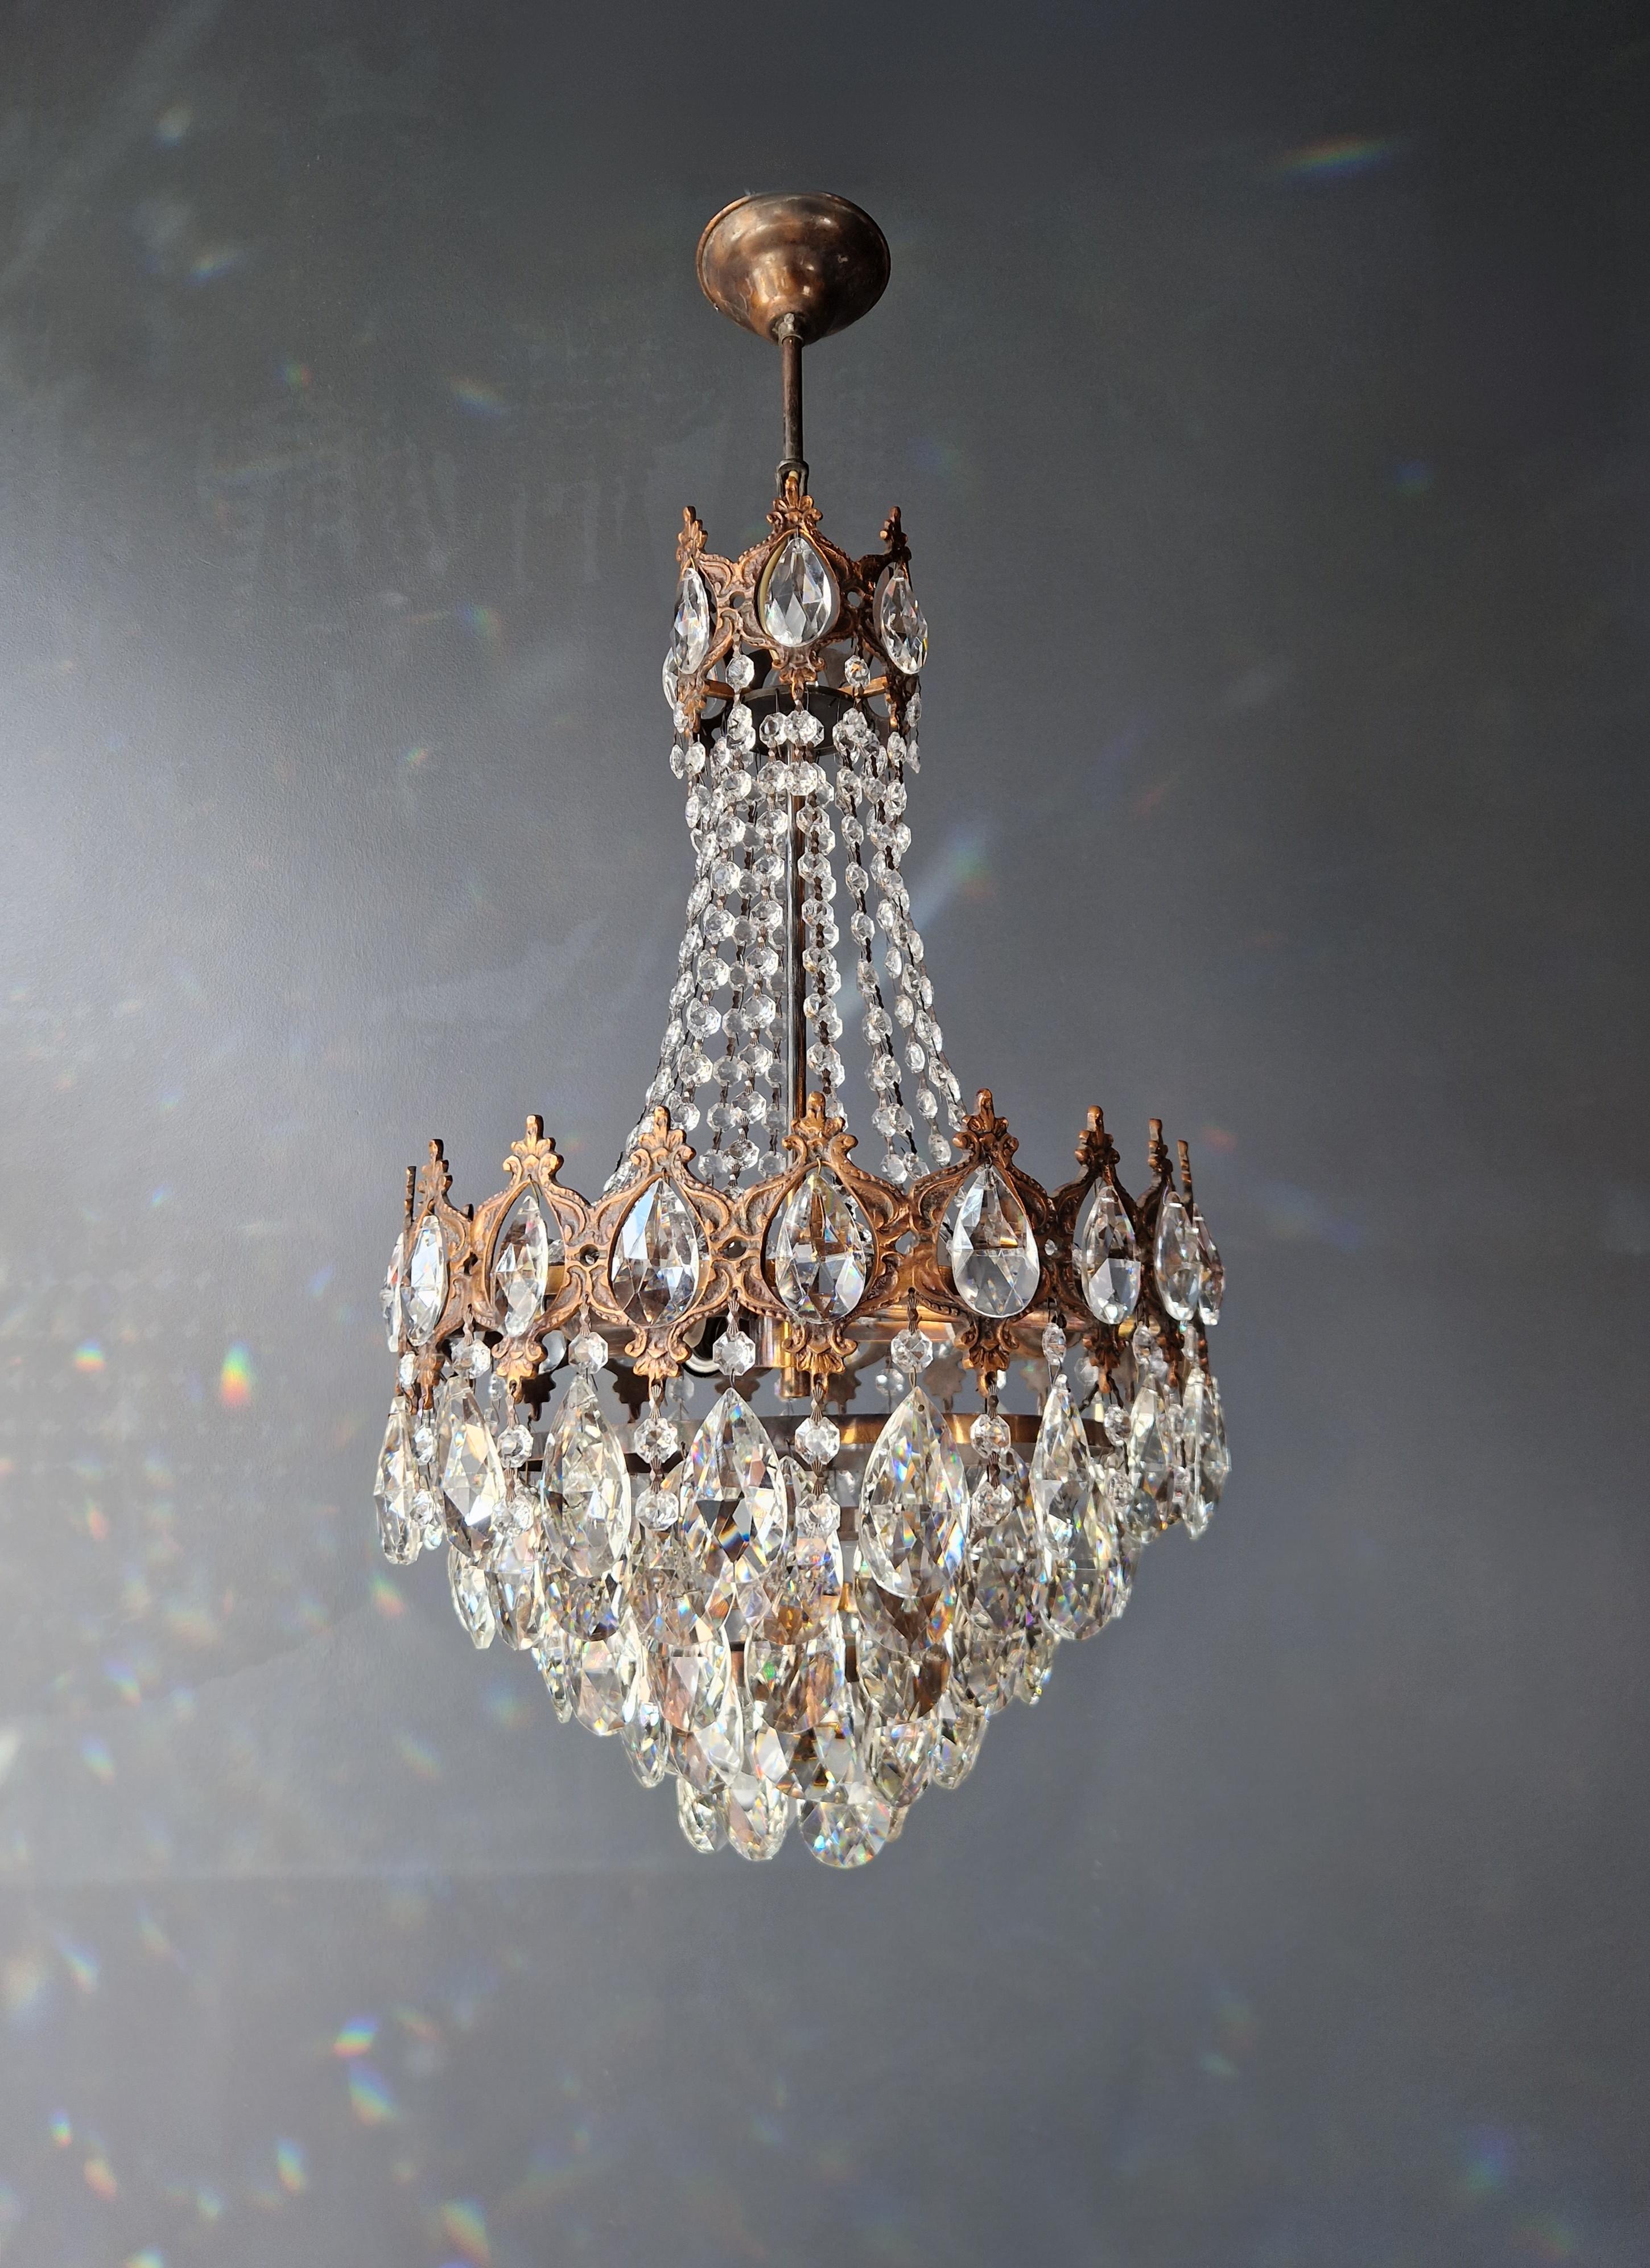 Introducing our beautifully restored old chandelier from Berlin! This exquisite piece has been professionally refurbished with love, making it suitable for use in the US with its rewired electrical system. Not a single crystal is missing, and each